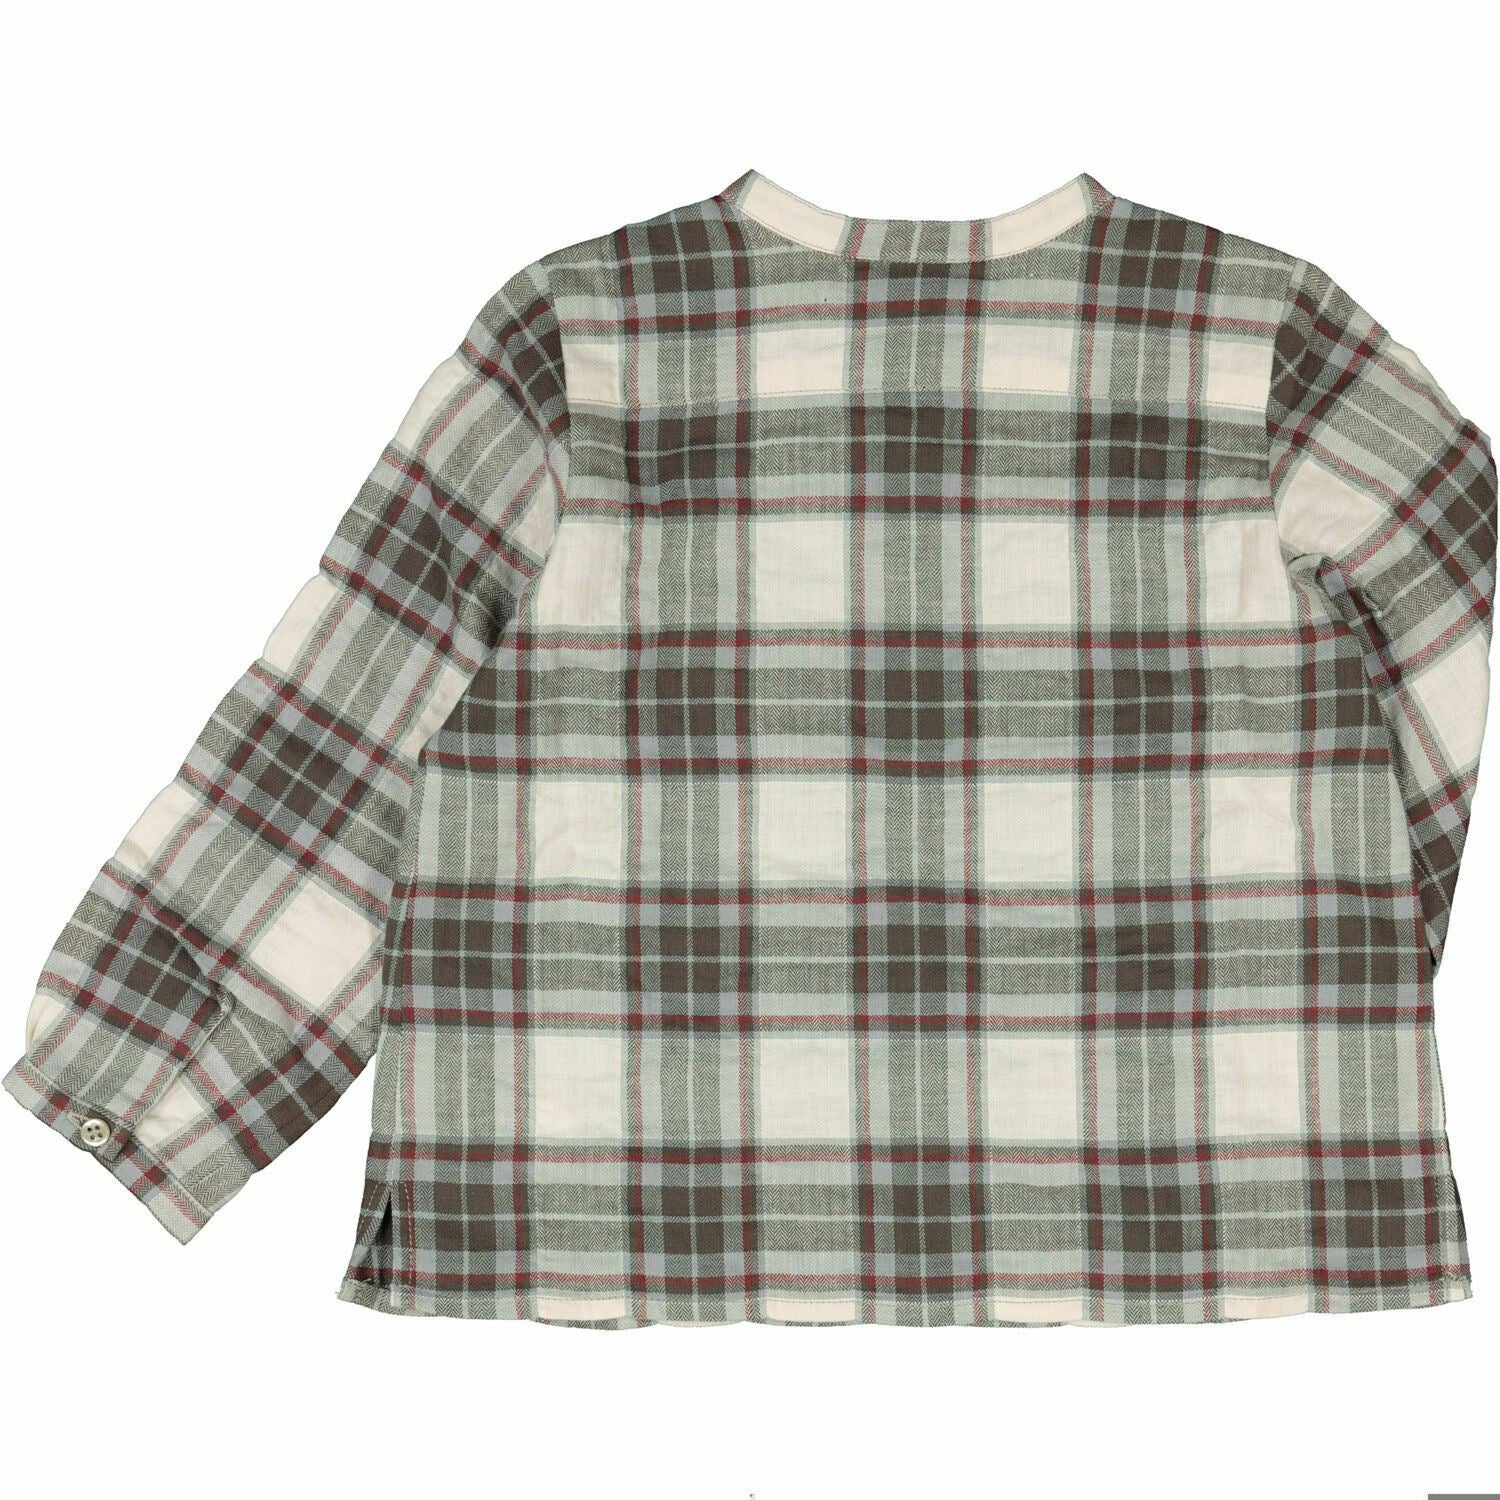 BONPOINT Baby Girls' Long Sleeve Checked Shirt Top, White/Red/Grey,18 months